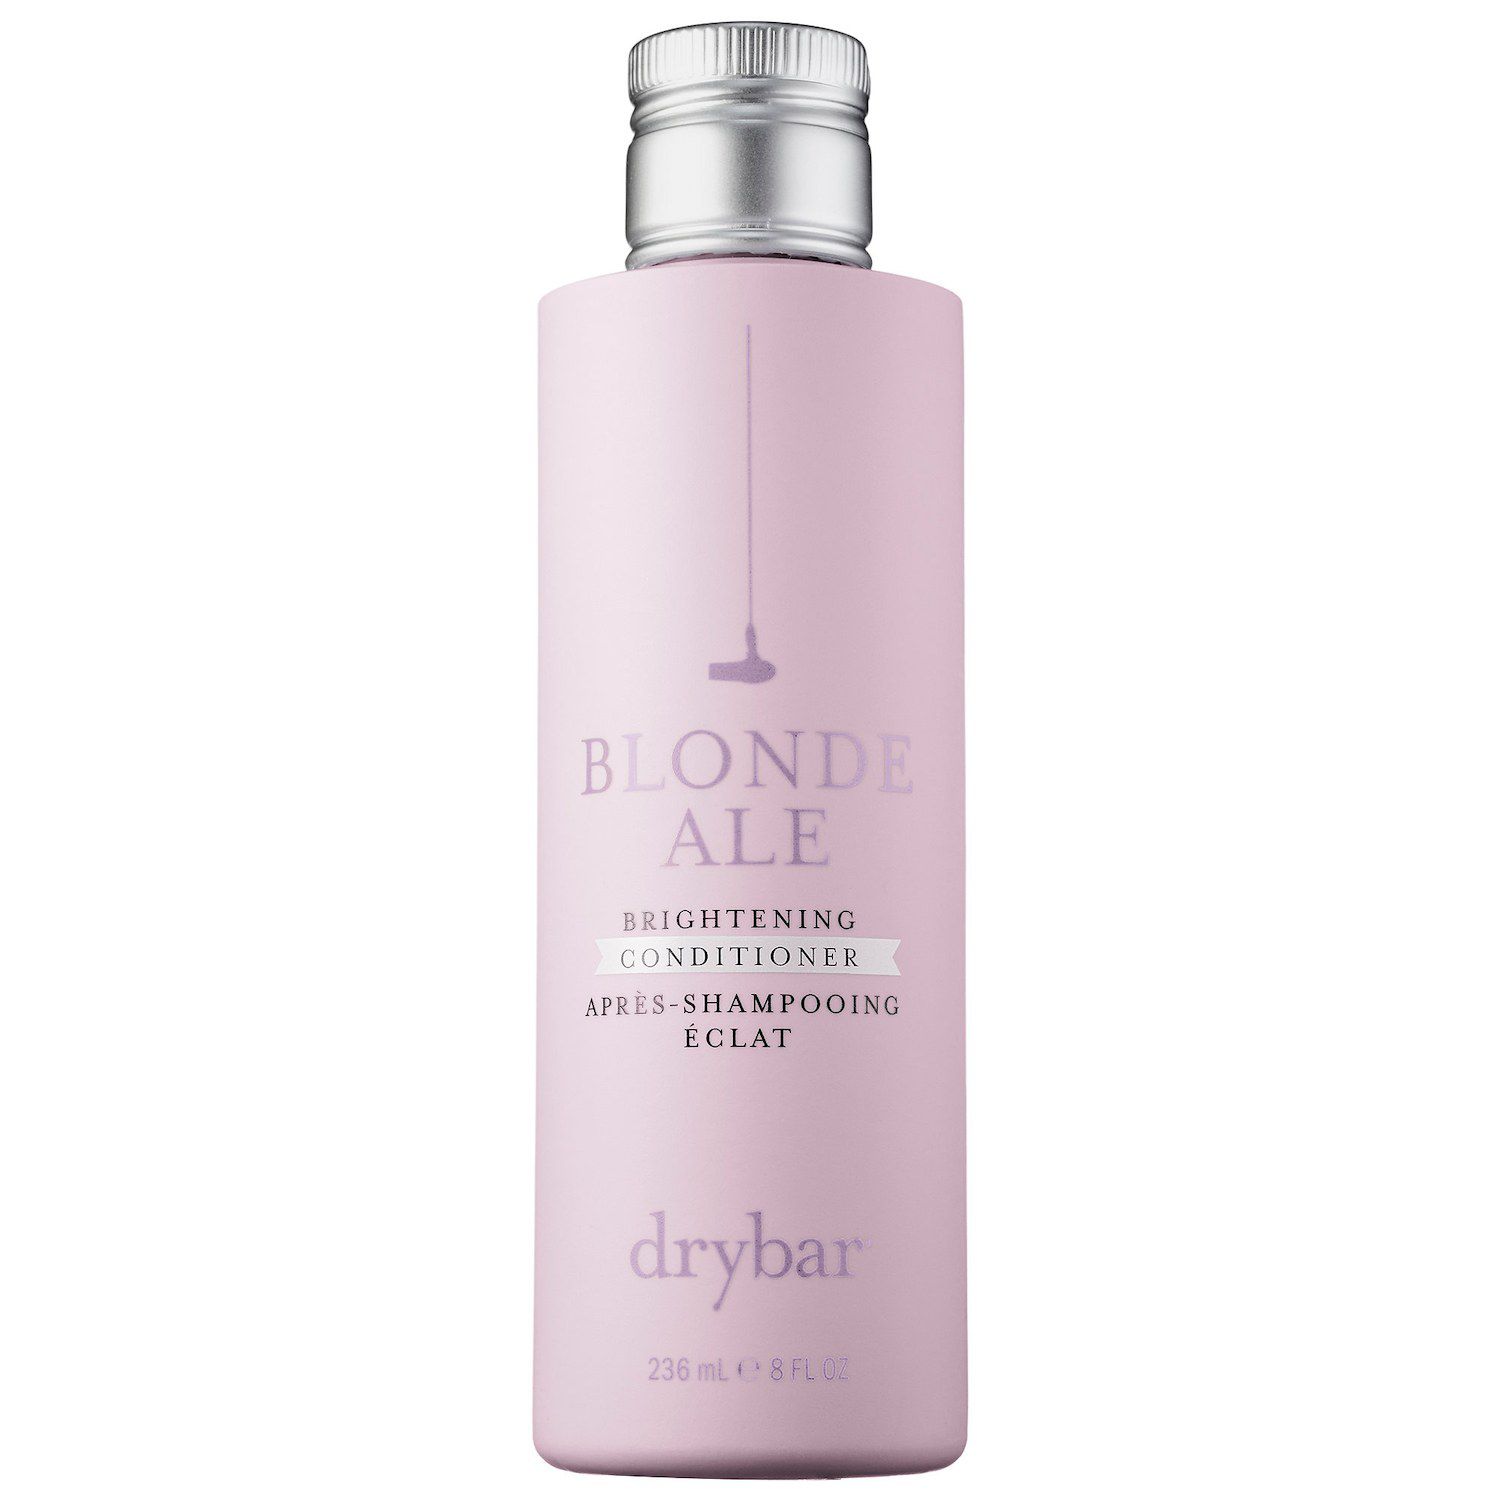 Image for Drybar Blonde Ale Brightening Conditioner at Kohl's.